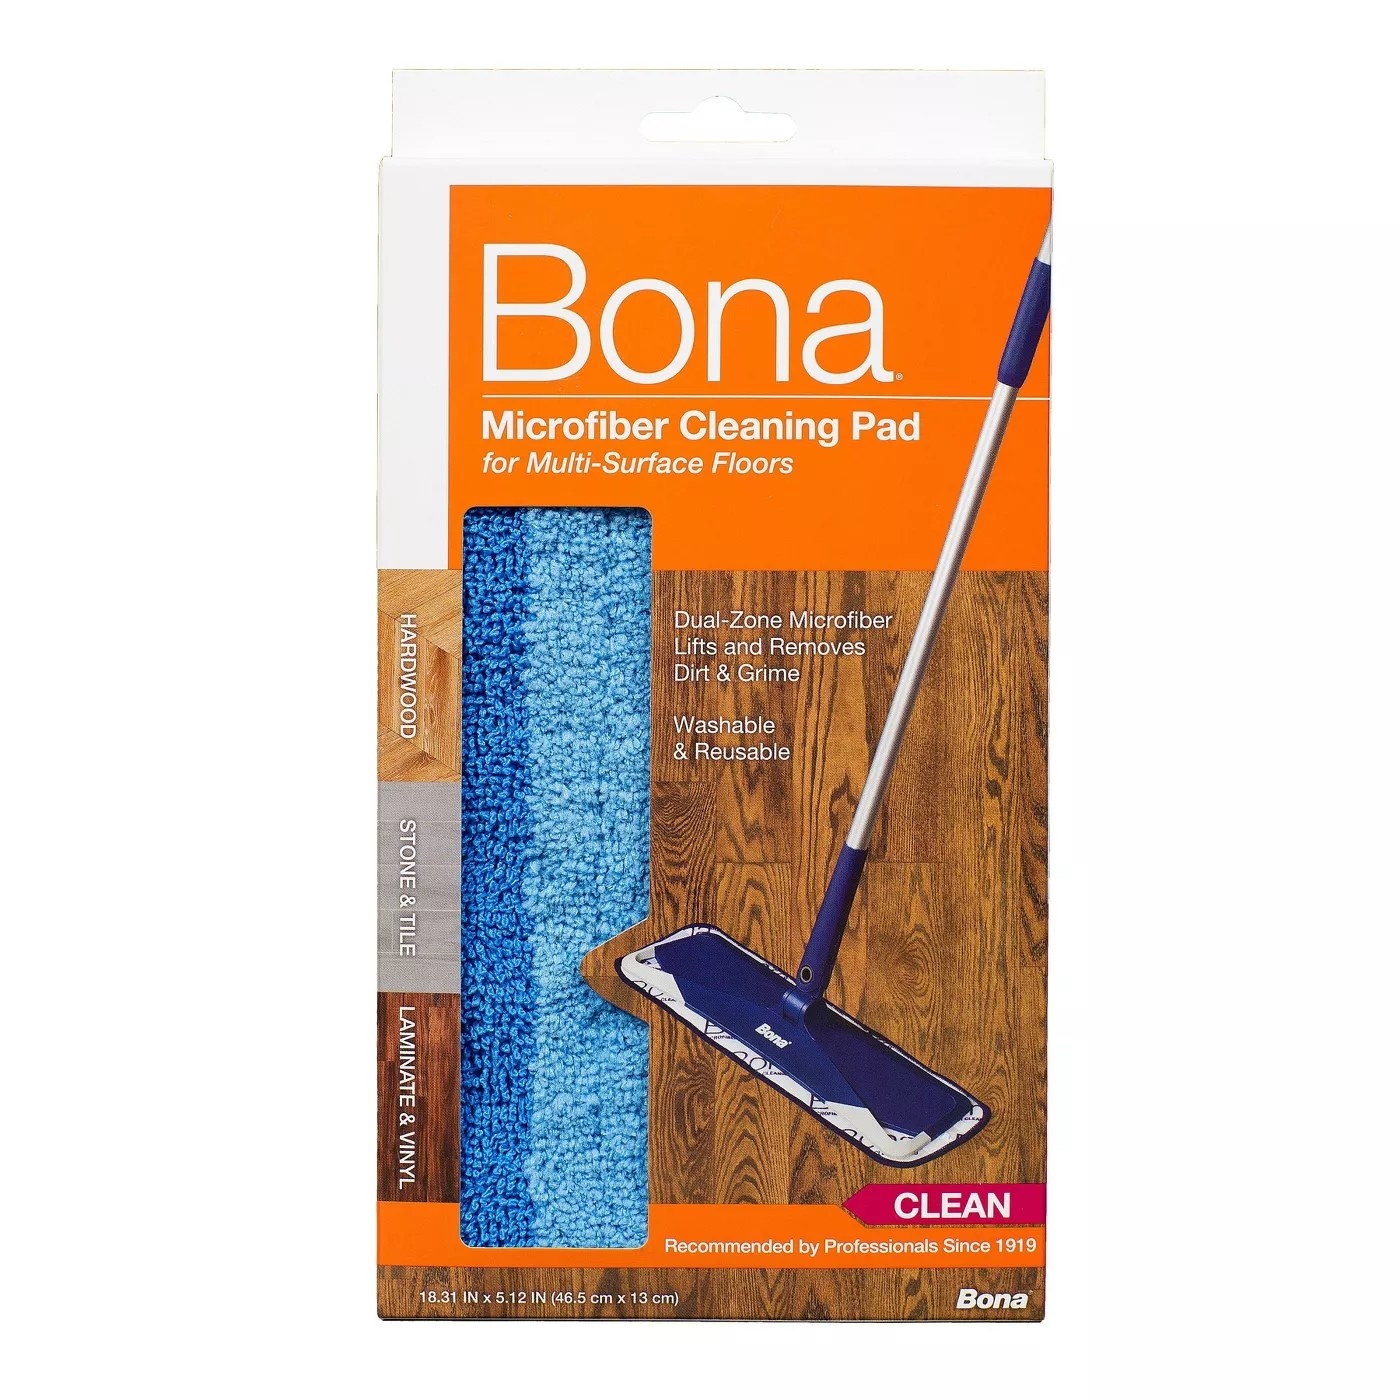 The Bona microfiber cleaning pad for multi-surface floors including hardwood, stone, tile, laminate, and vinyl